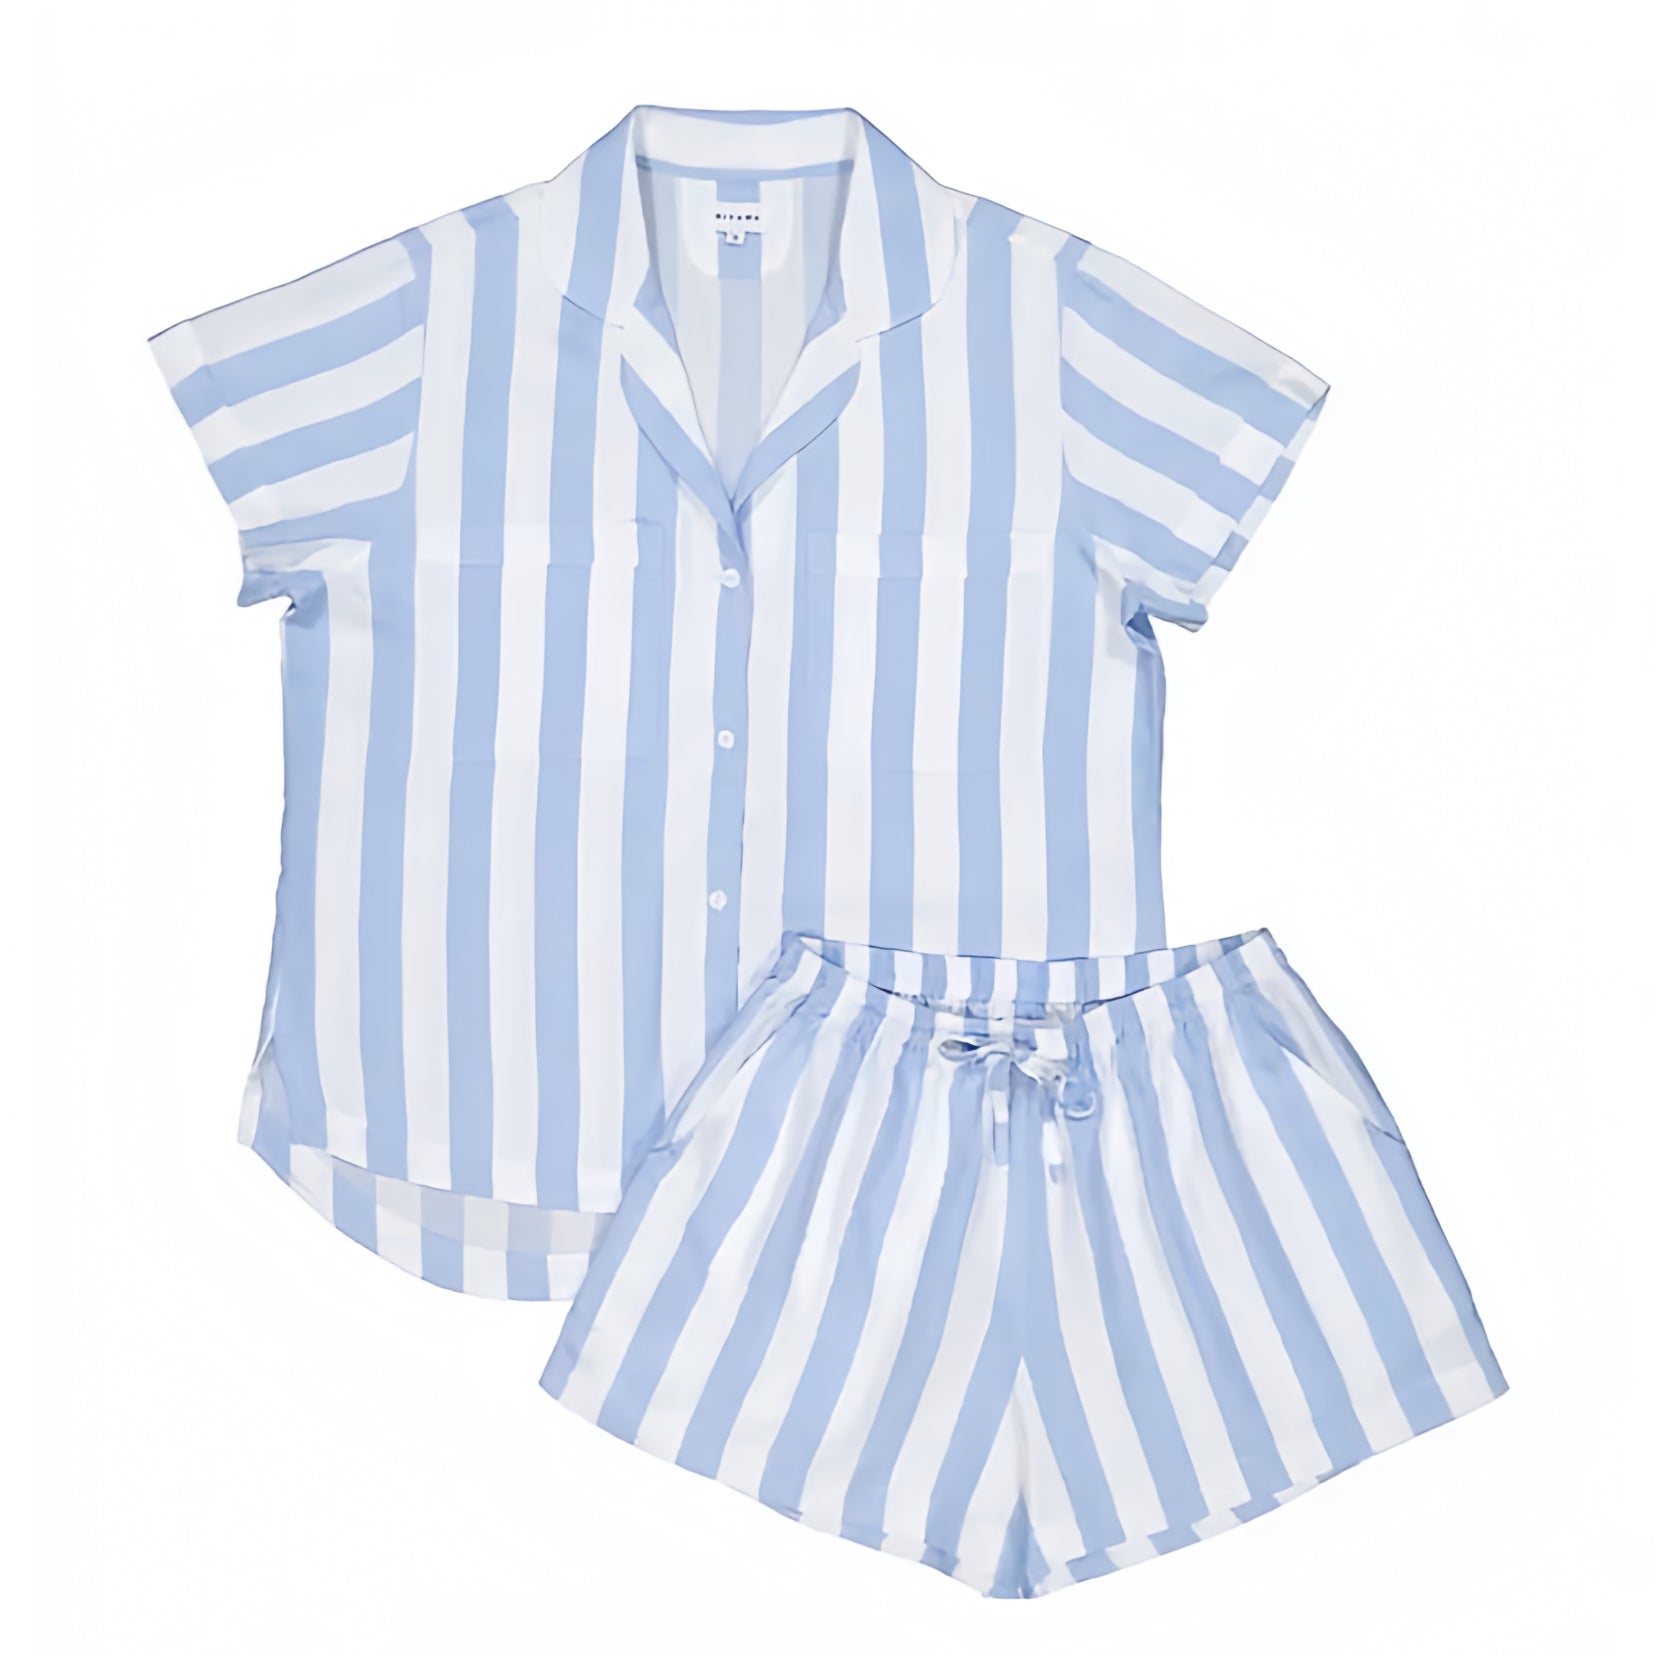 light-blue-and-white-striped-seersucker-patterned-cotton-linen-button-down-short-sleeve-tee-shirt-shorts-pajama-set-pjs-lounge-wear-comfortable-cozy-women-ladies-chic-trendy-spring-2024-summer-elegant-casual-feminine-preppy-style-coastal-granddaughter-roller-rabbit-serena-lily-hill-house-eberjey